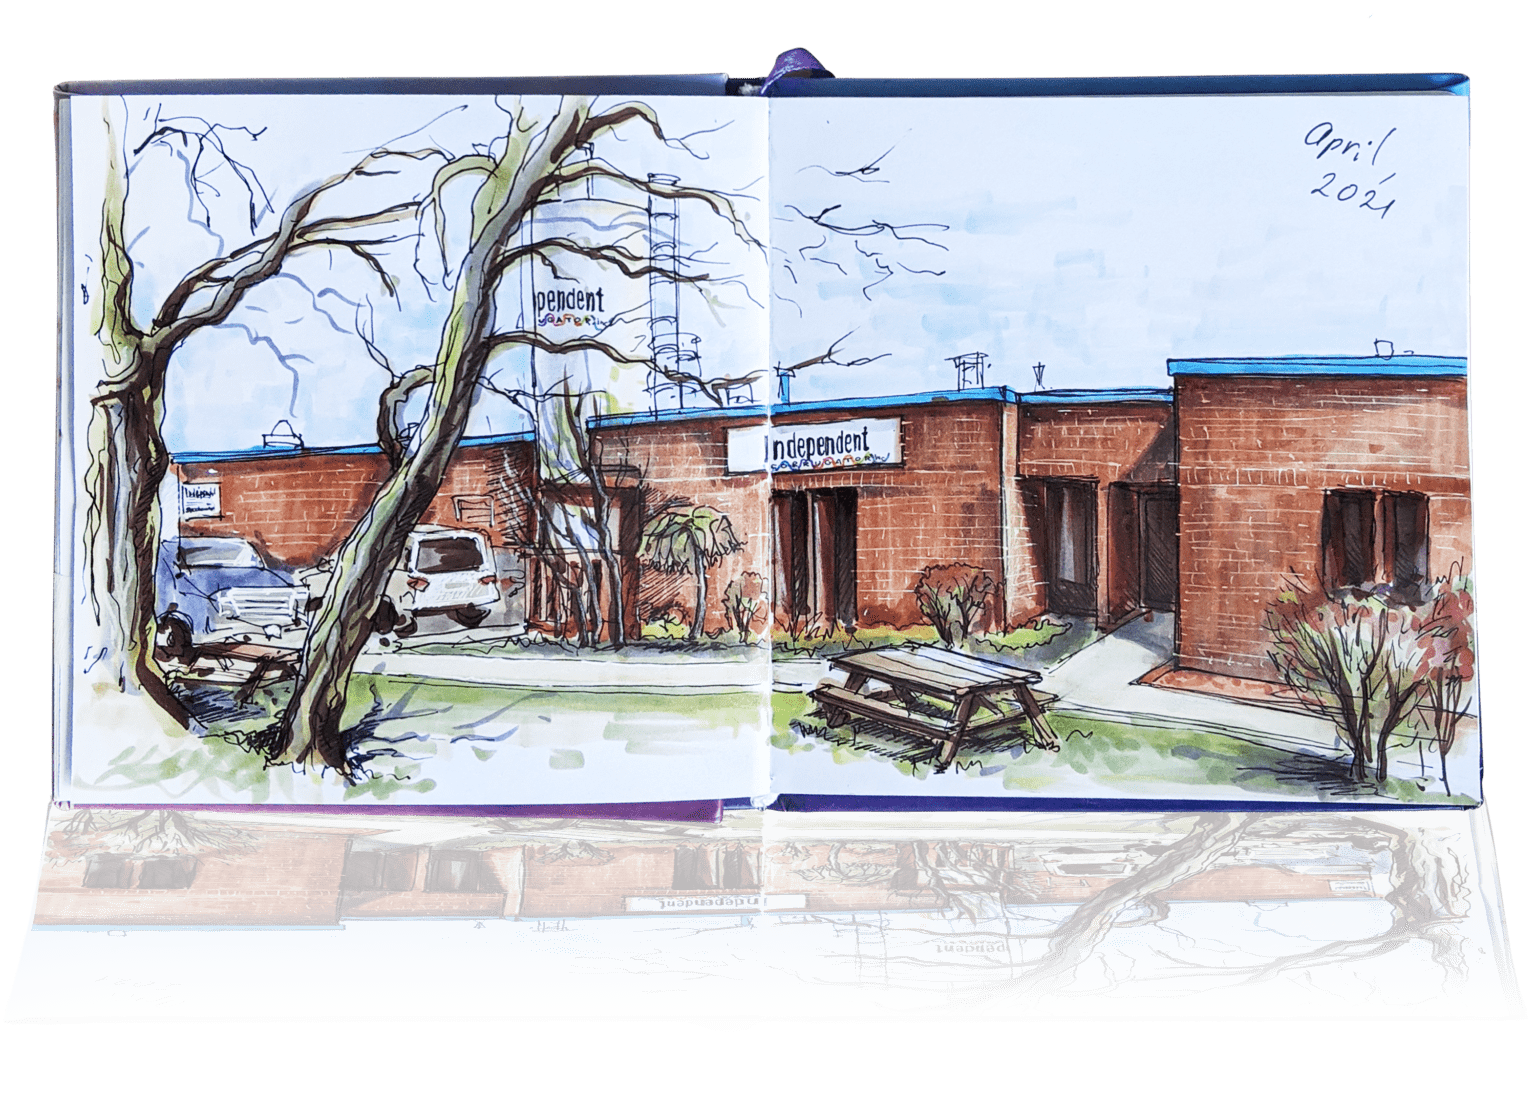 Artistic sketch in an open sketch book of the exterior of Independent Corrugator Inc. building.